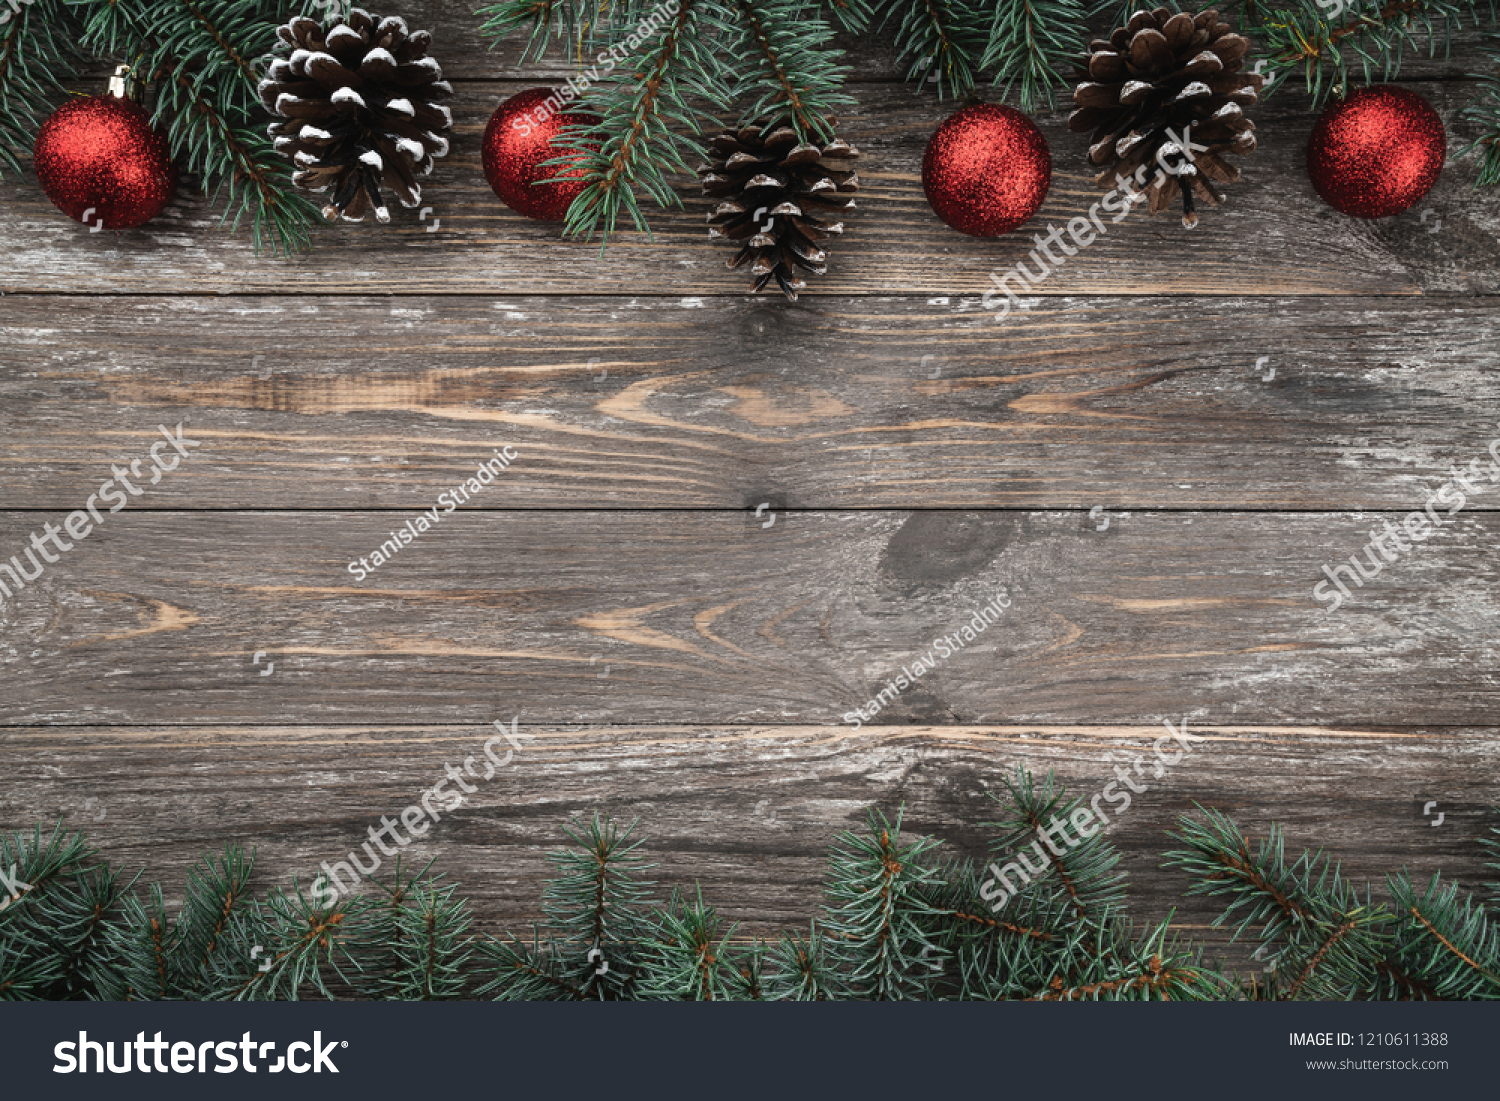 Old wood background with fir branches adorned with baubles and cones. Space for text. Christmas card. Top view. Xmas. #1210611388